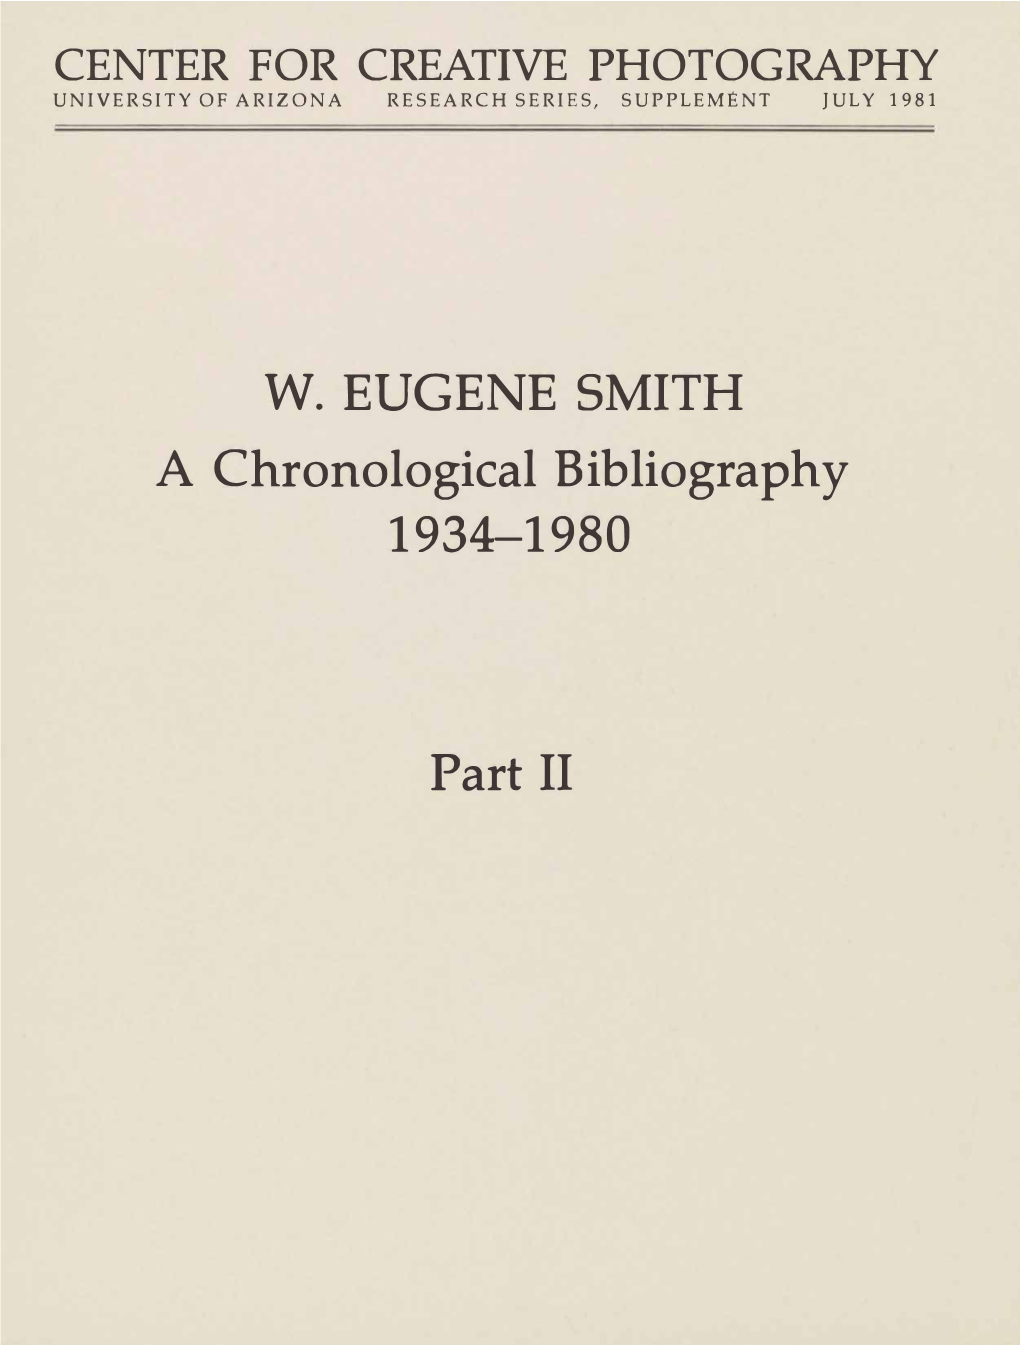 W. EUGENE SMITH a Chronological Bibliography Part II